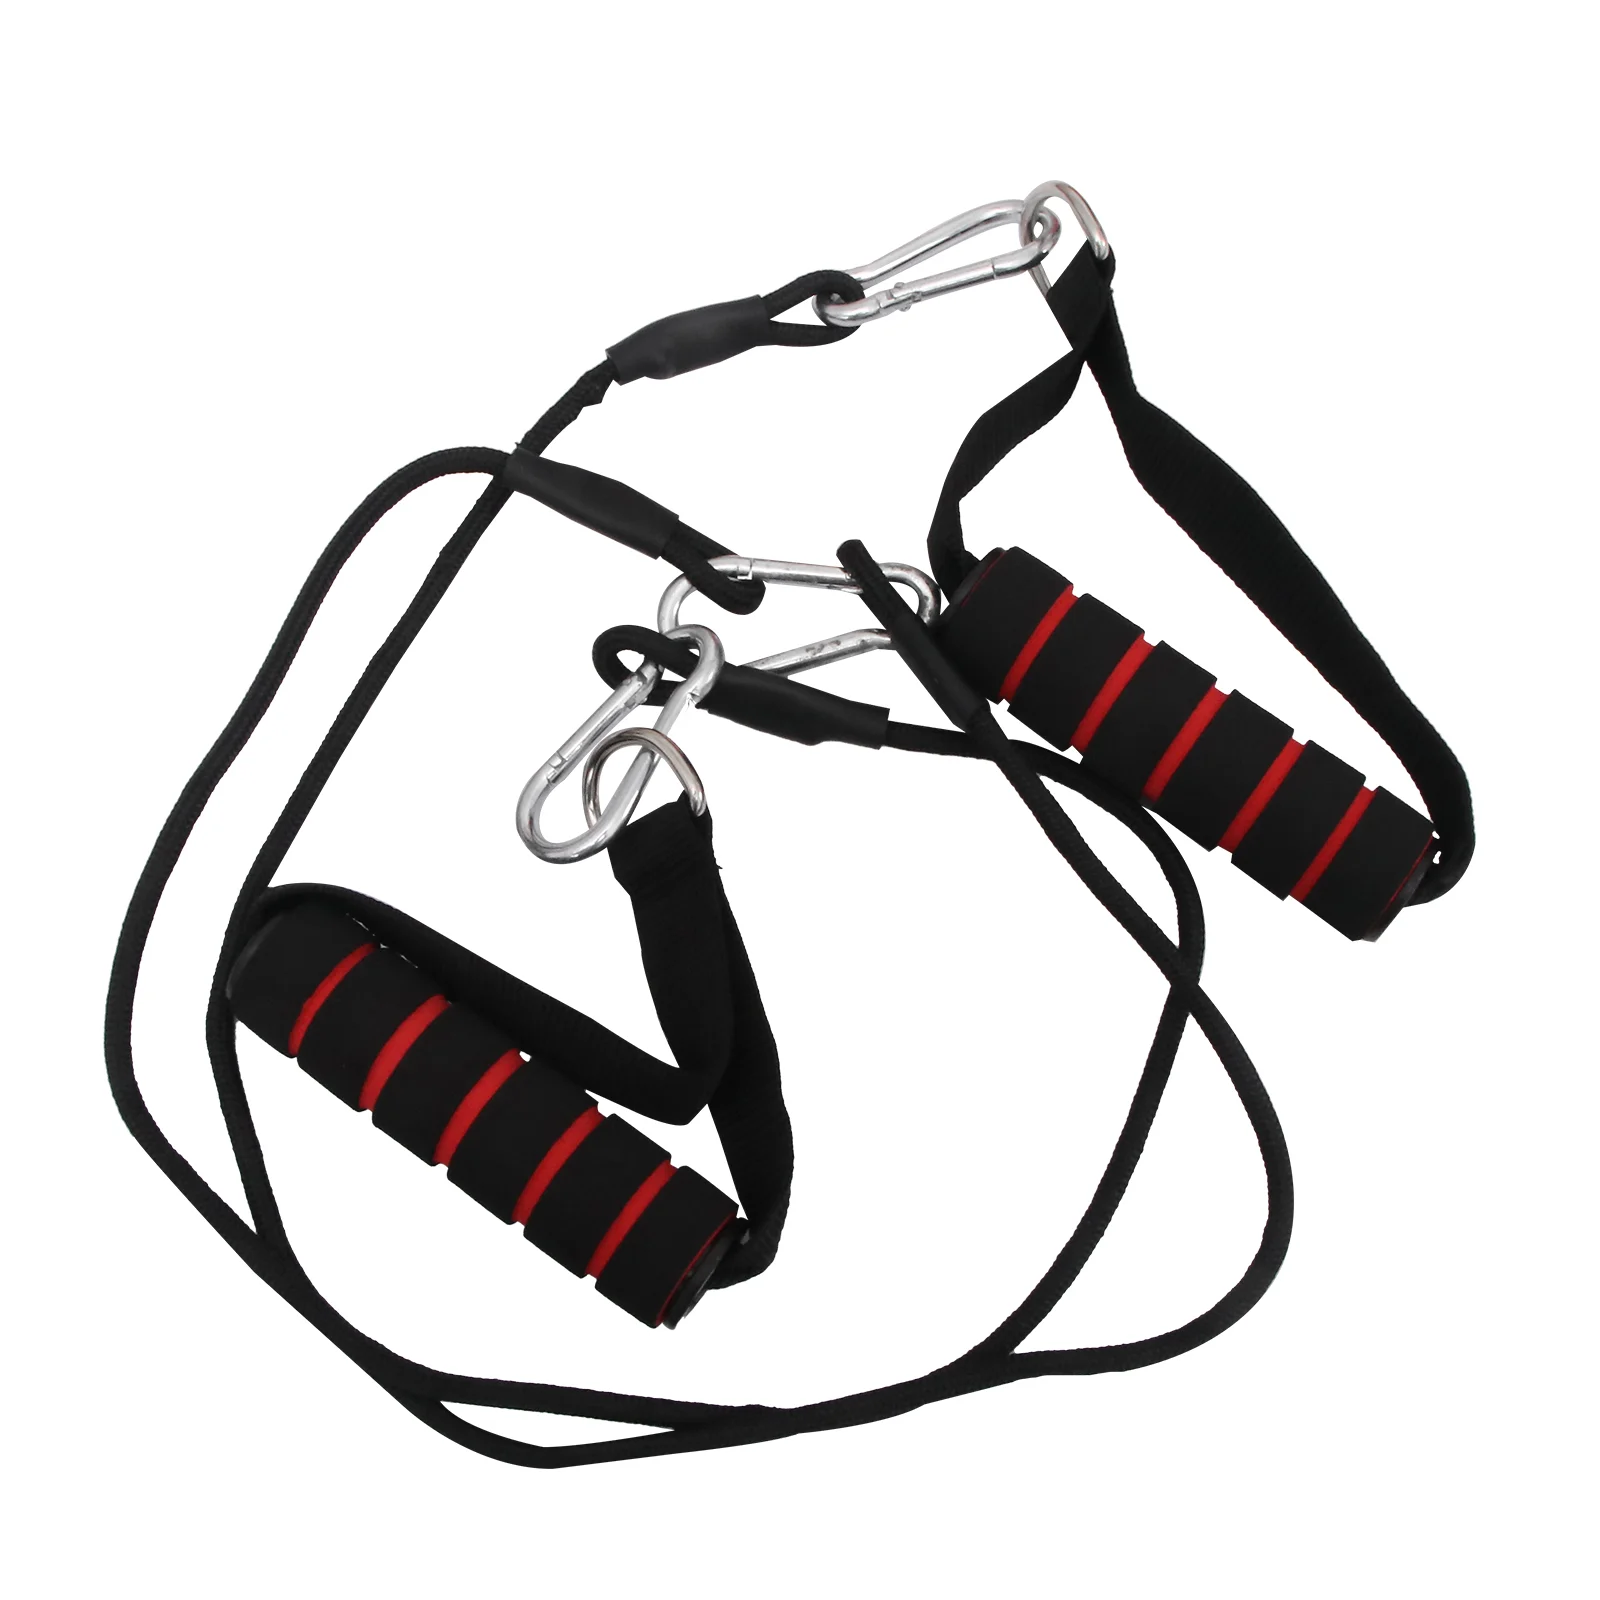 

Bands Pulley Exercise System Rope Workout Arm Resistance Cable Ropes Attachment Tricep Fitness Pulldown Handles Cables Biceps